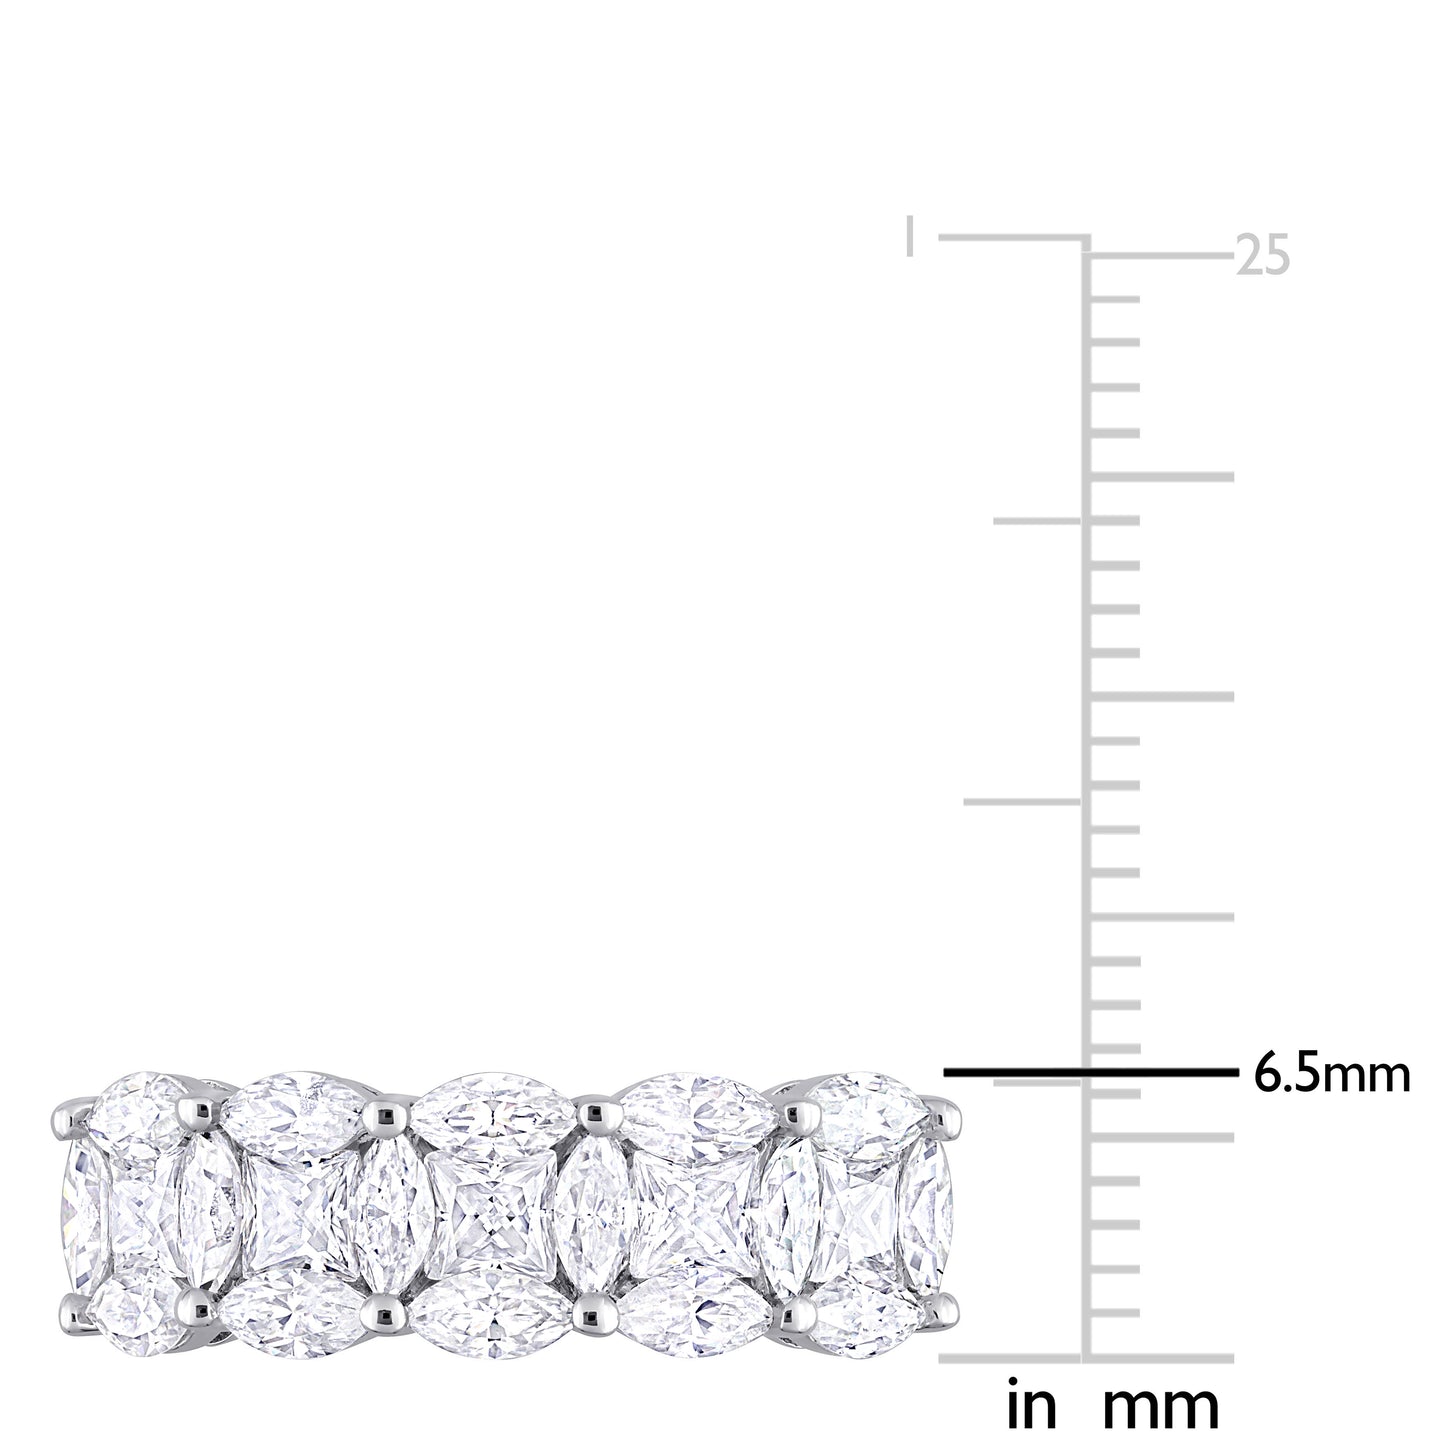 Marquise & Princess Moissanite Ring in Sterling Silver